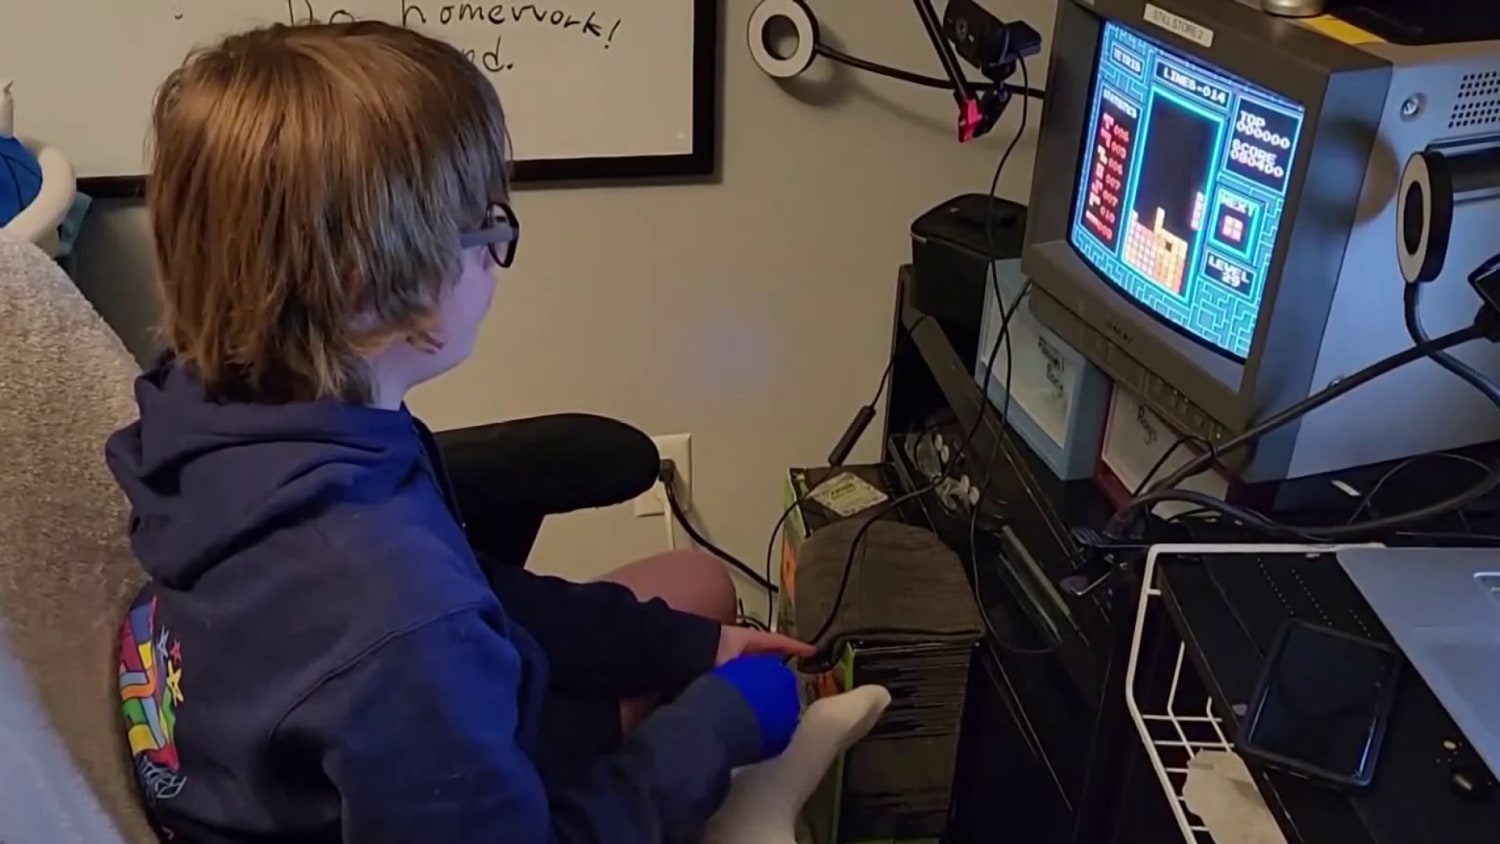 Boy, 13, Is Believed to Be the First to 'Beat' Tetris - The New York Times